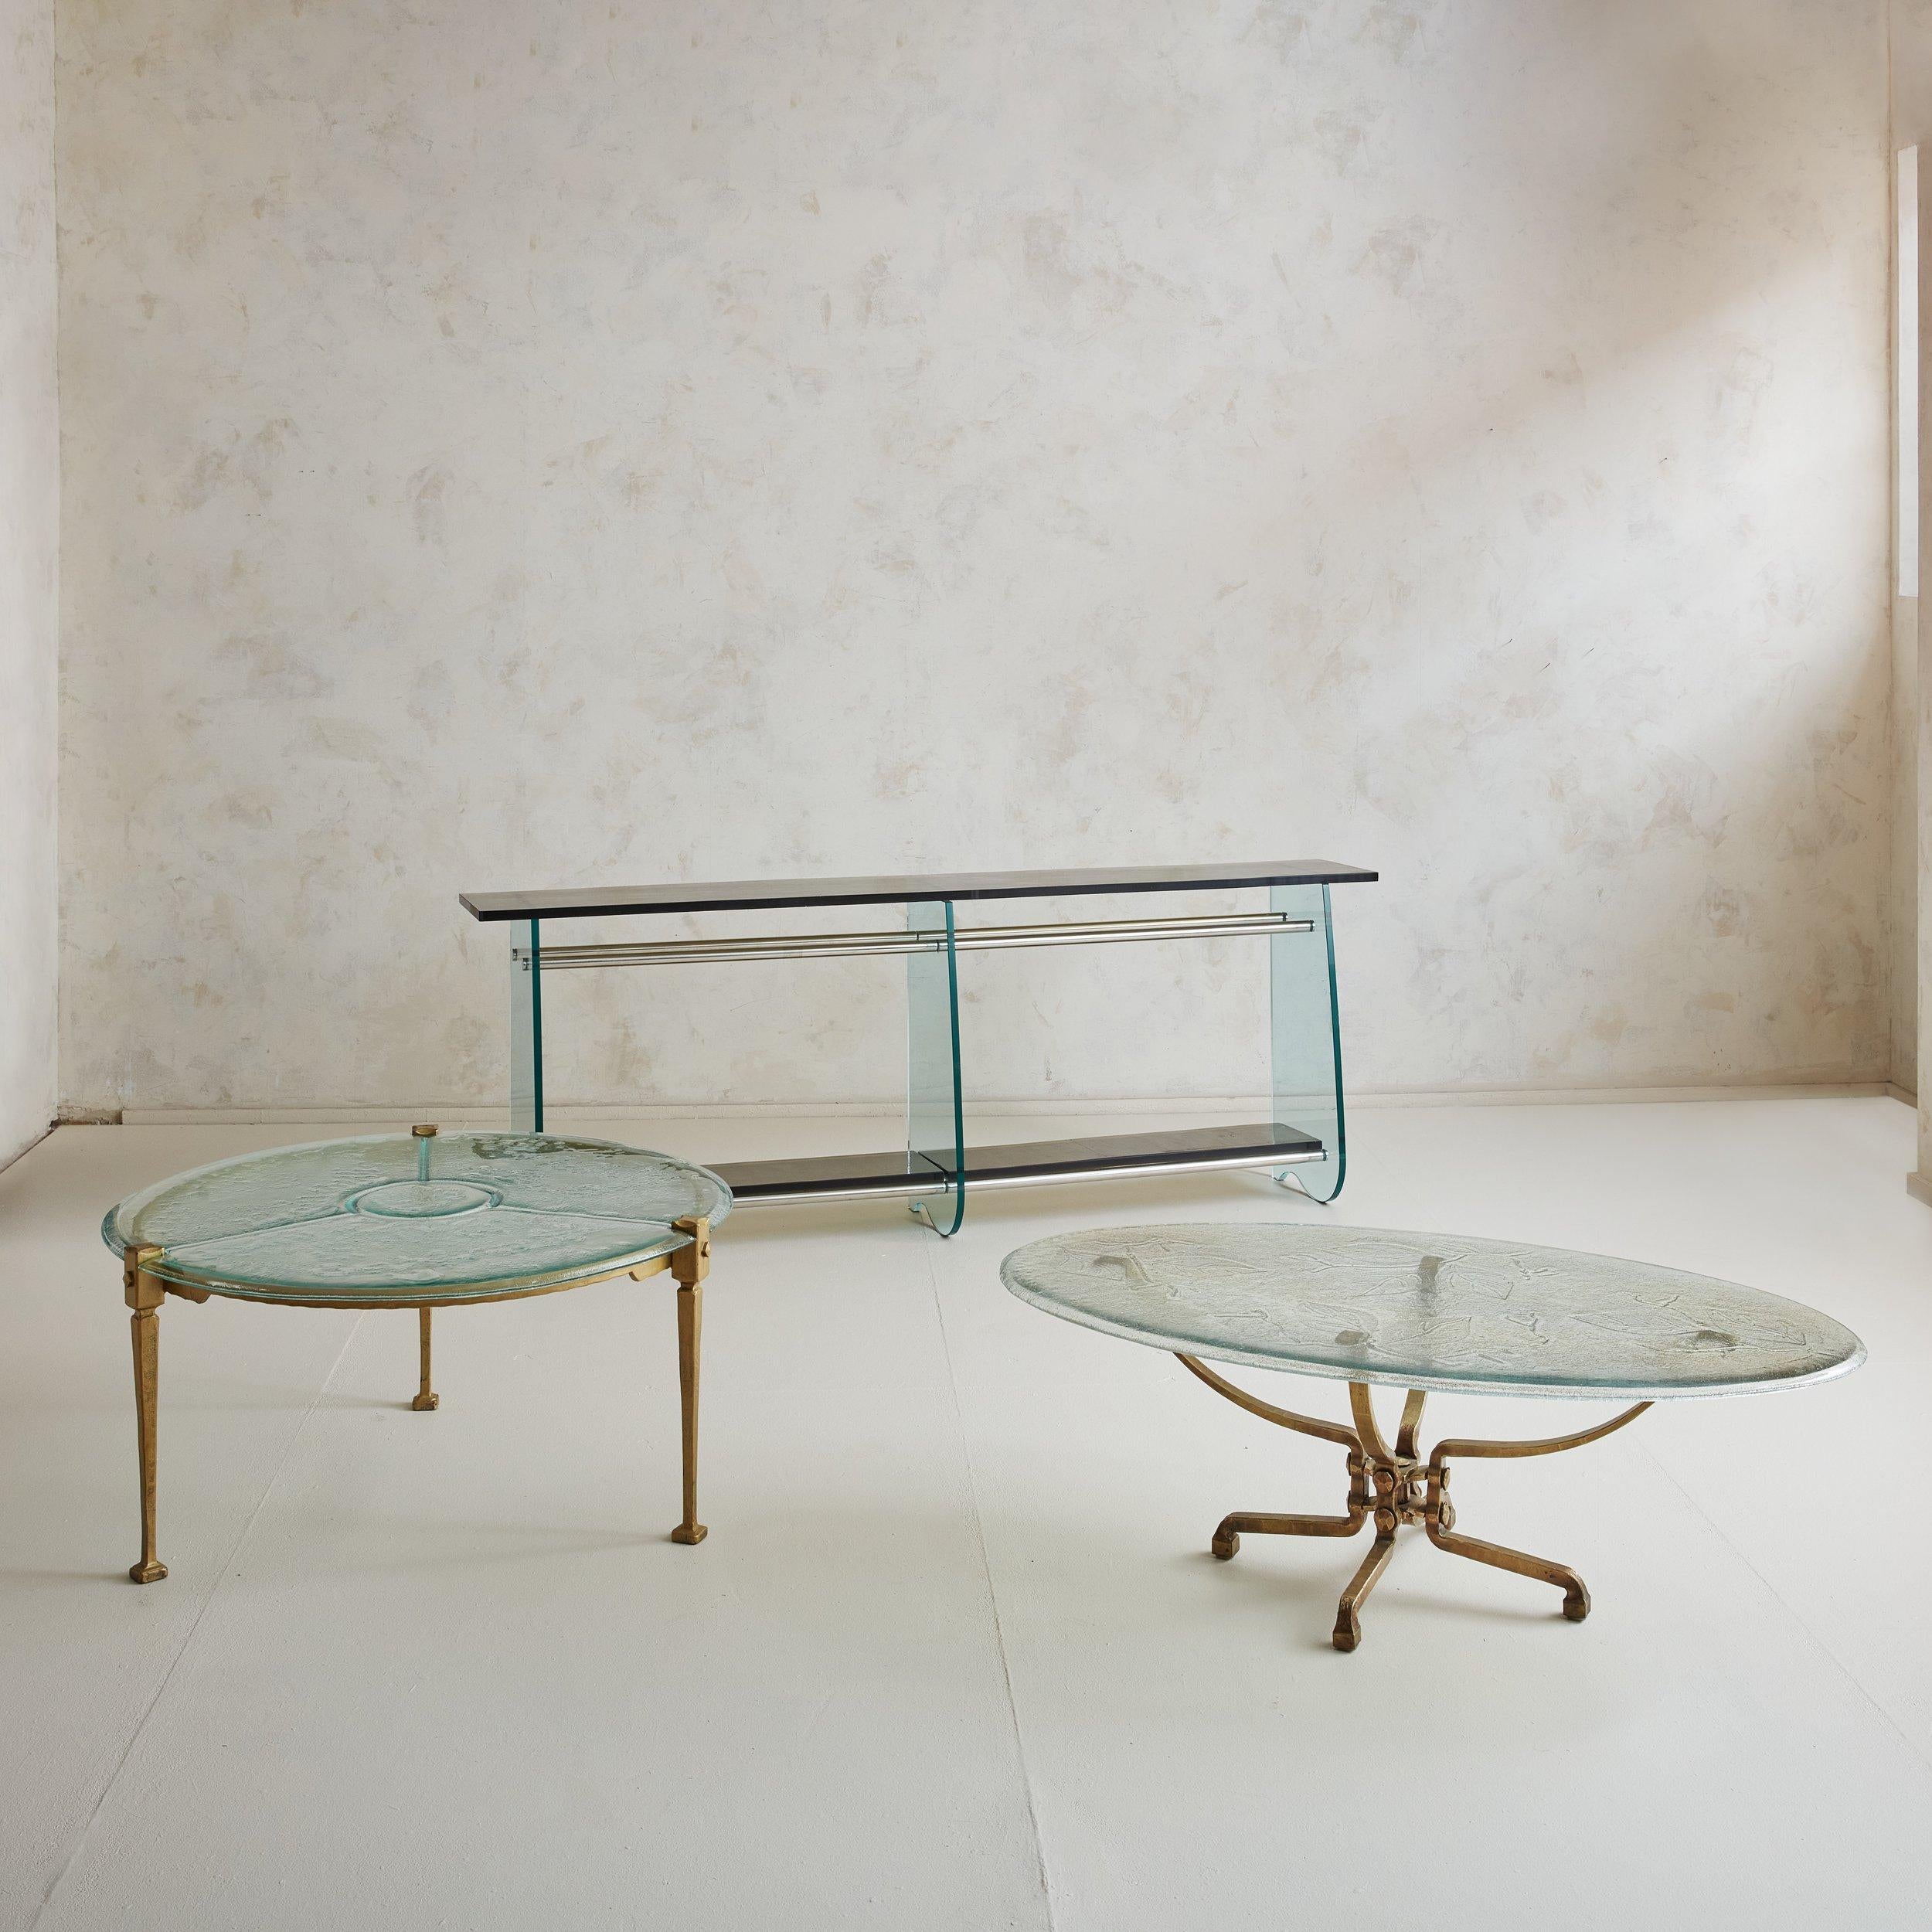 A rare brutalist brass and glass top round coffee table by German designer Lothar Klute. This coffee table features a brass frame with natural patina, three tapered legs, and square feet. A gorgeous geometric design in etched into the aqua hued